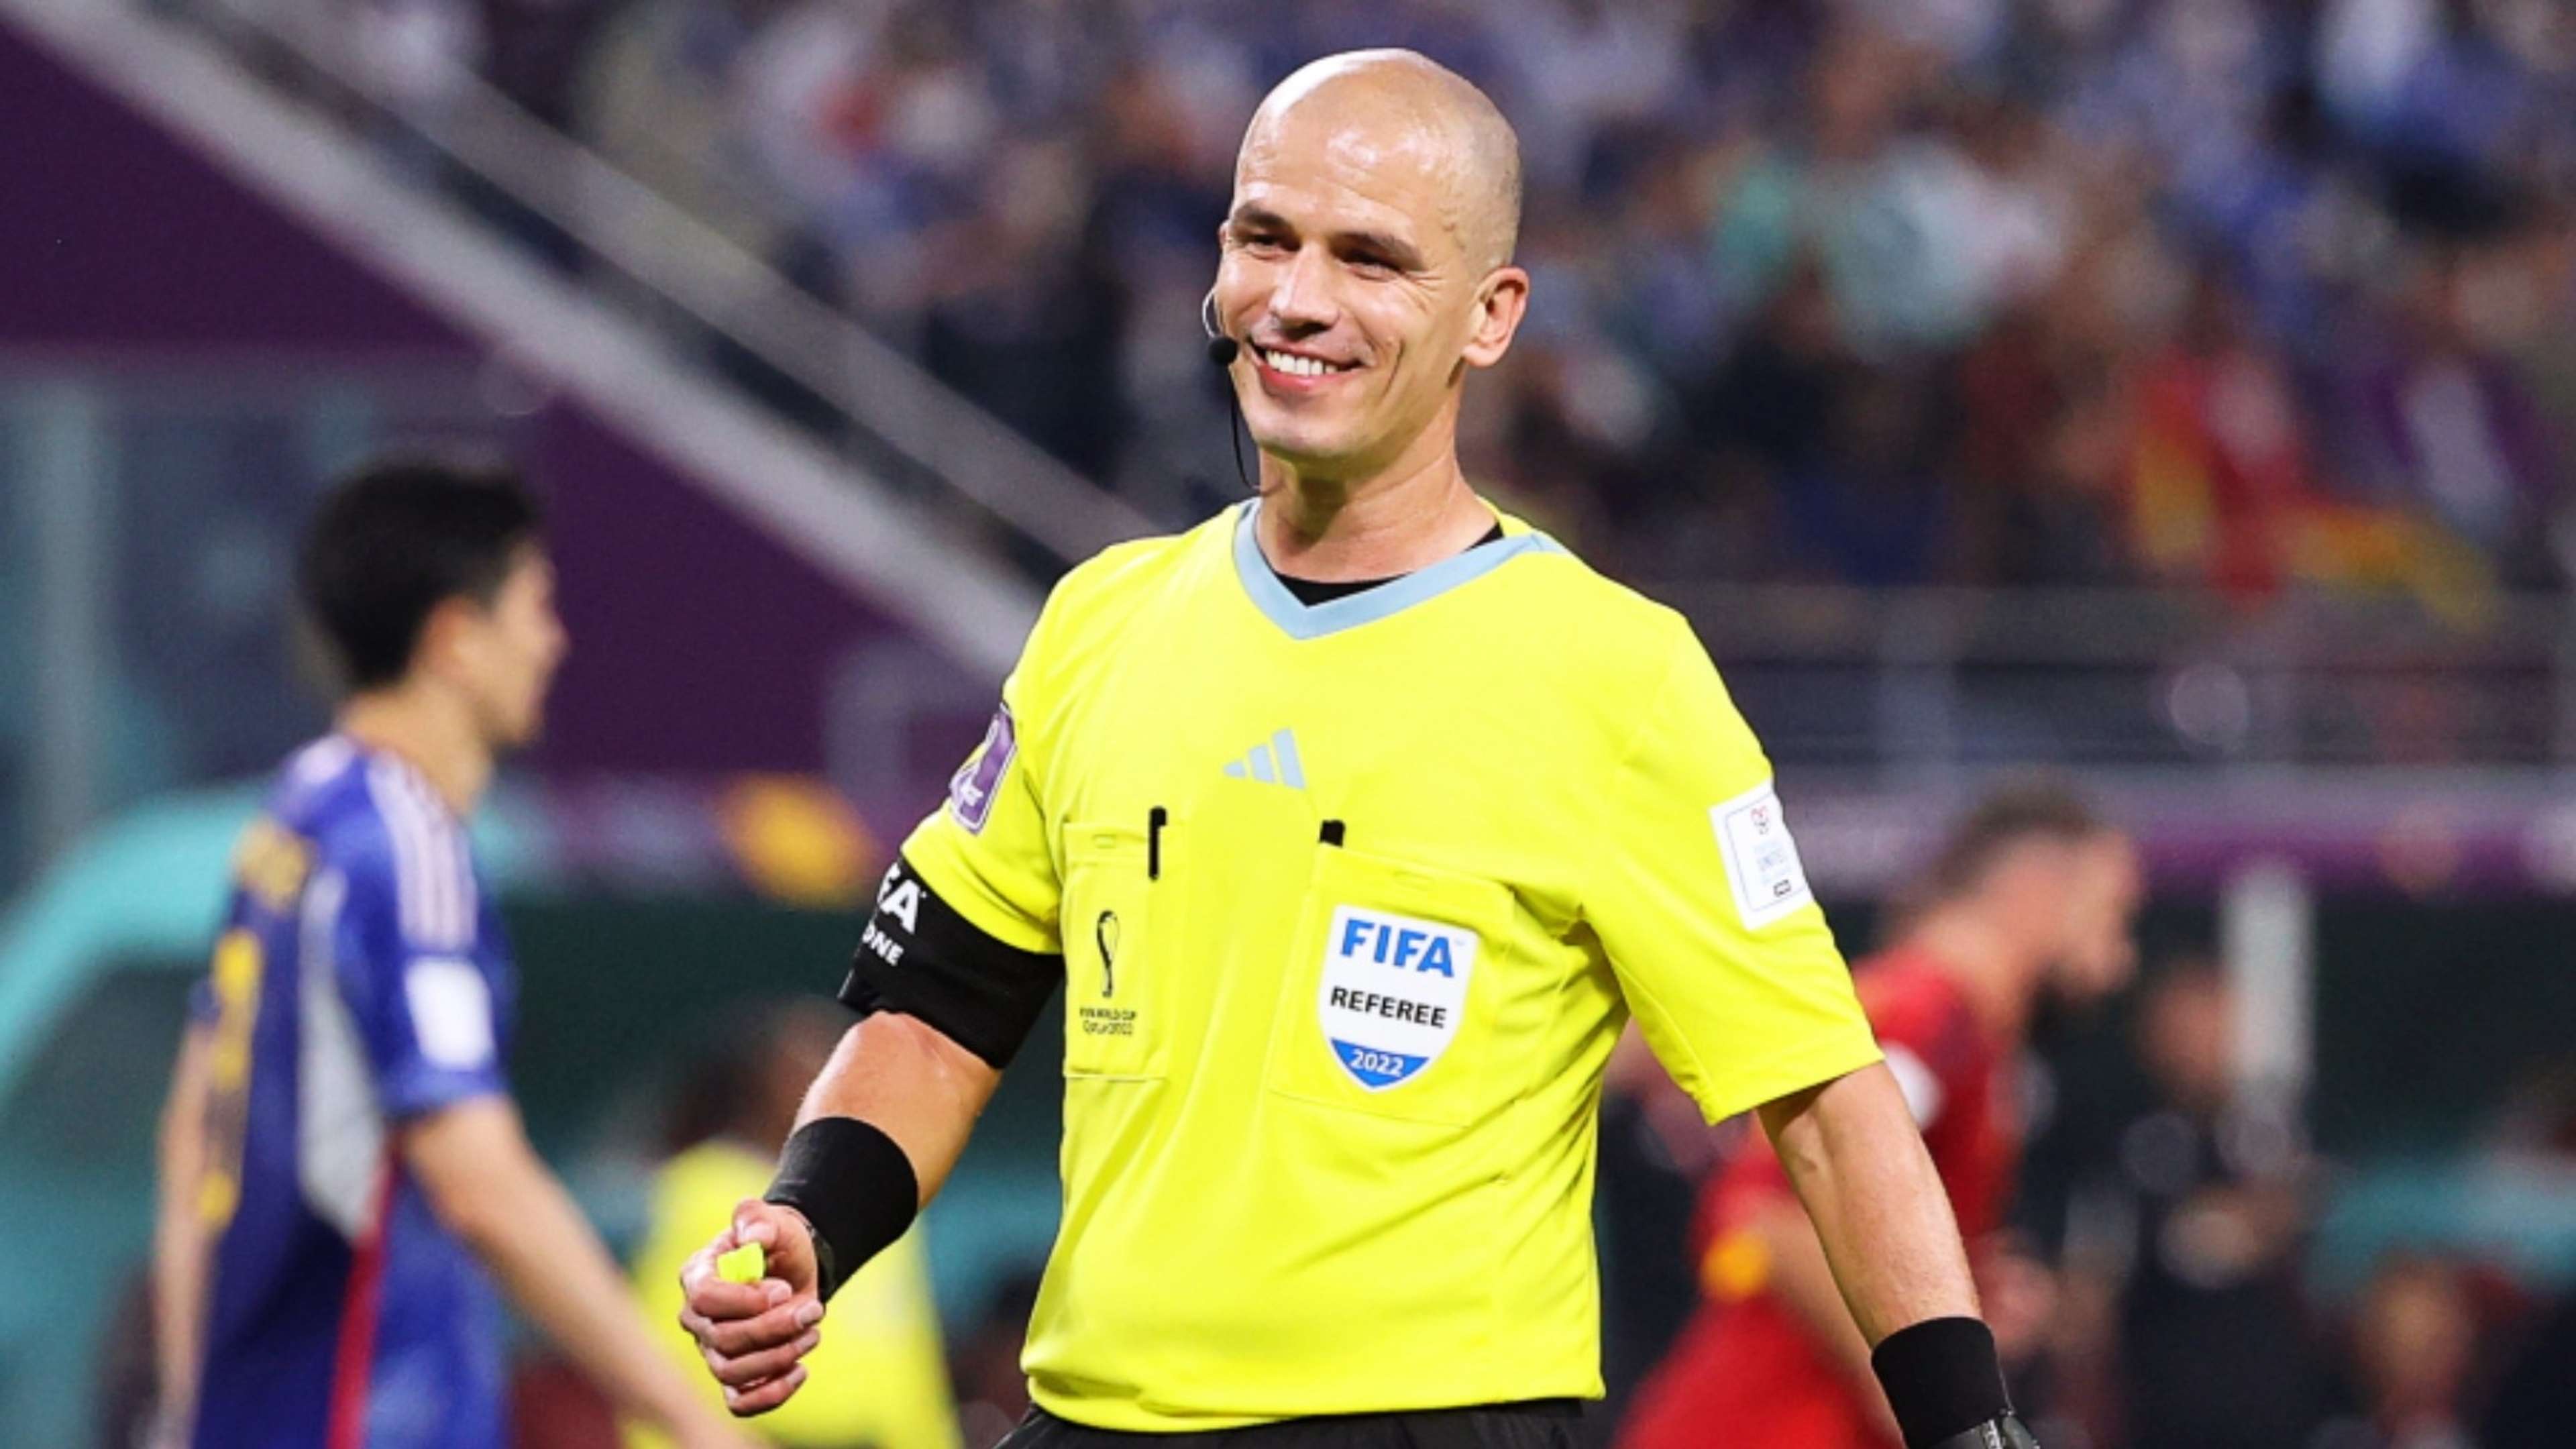 Victor Gomes, 2022 World Cup, December 2022